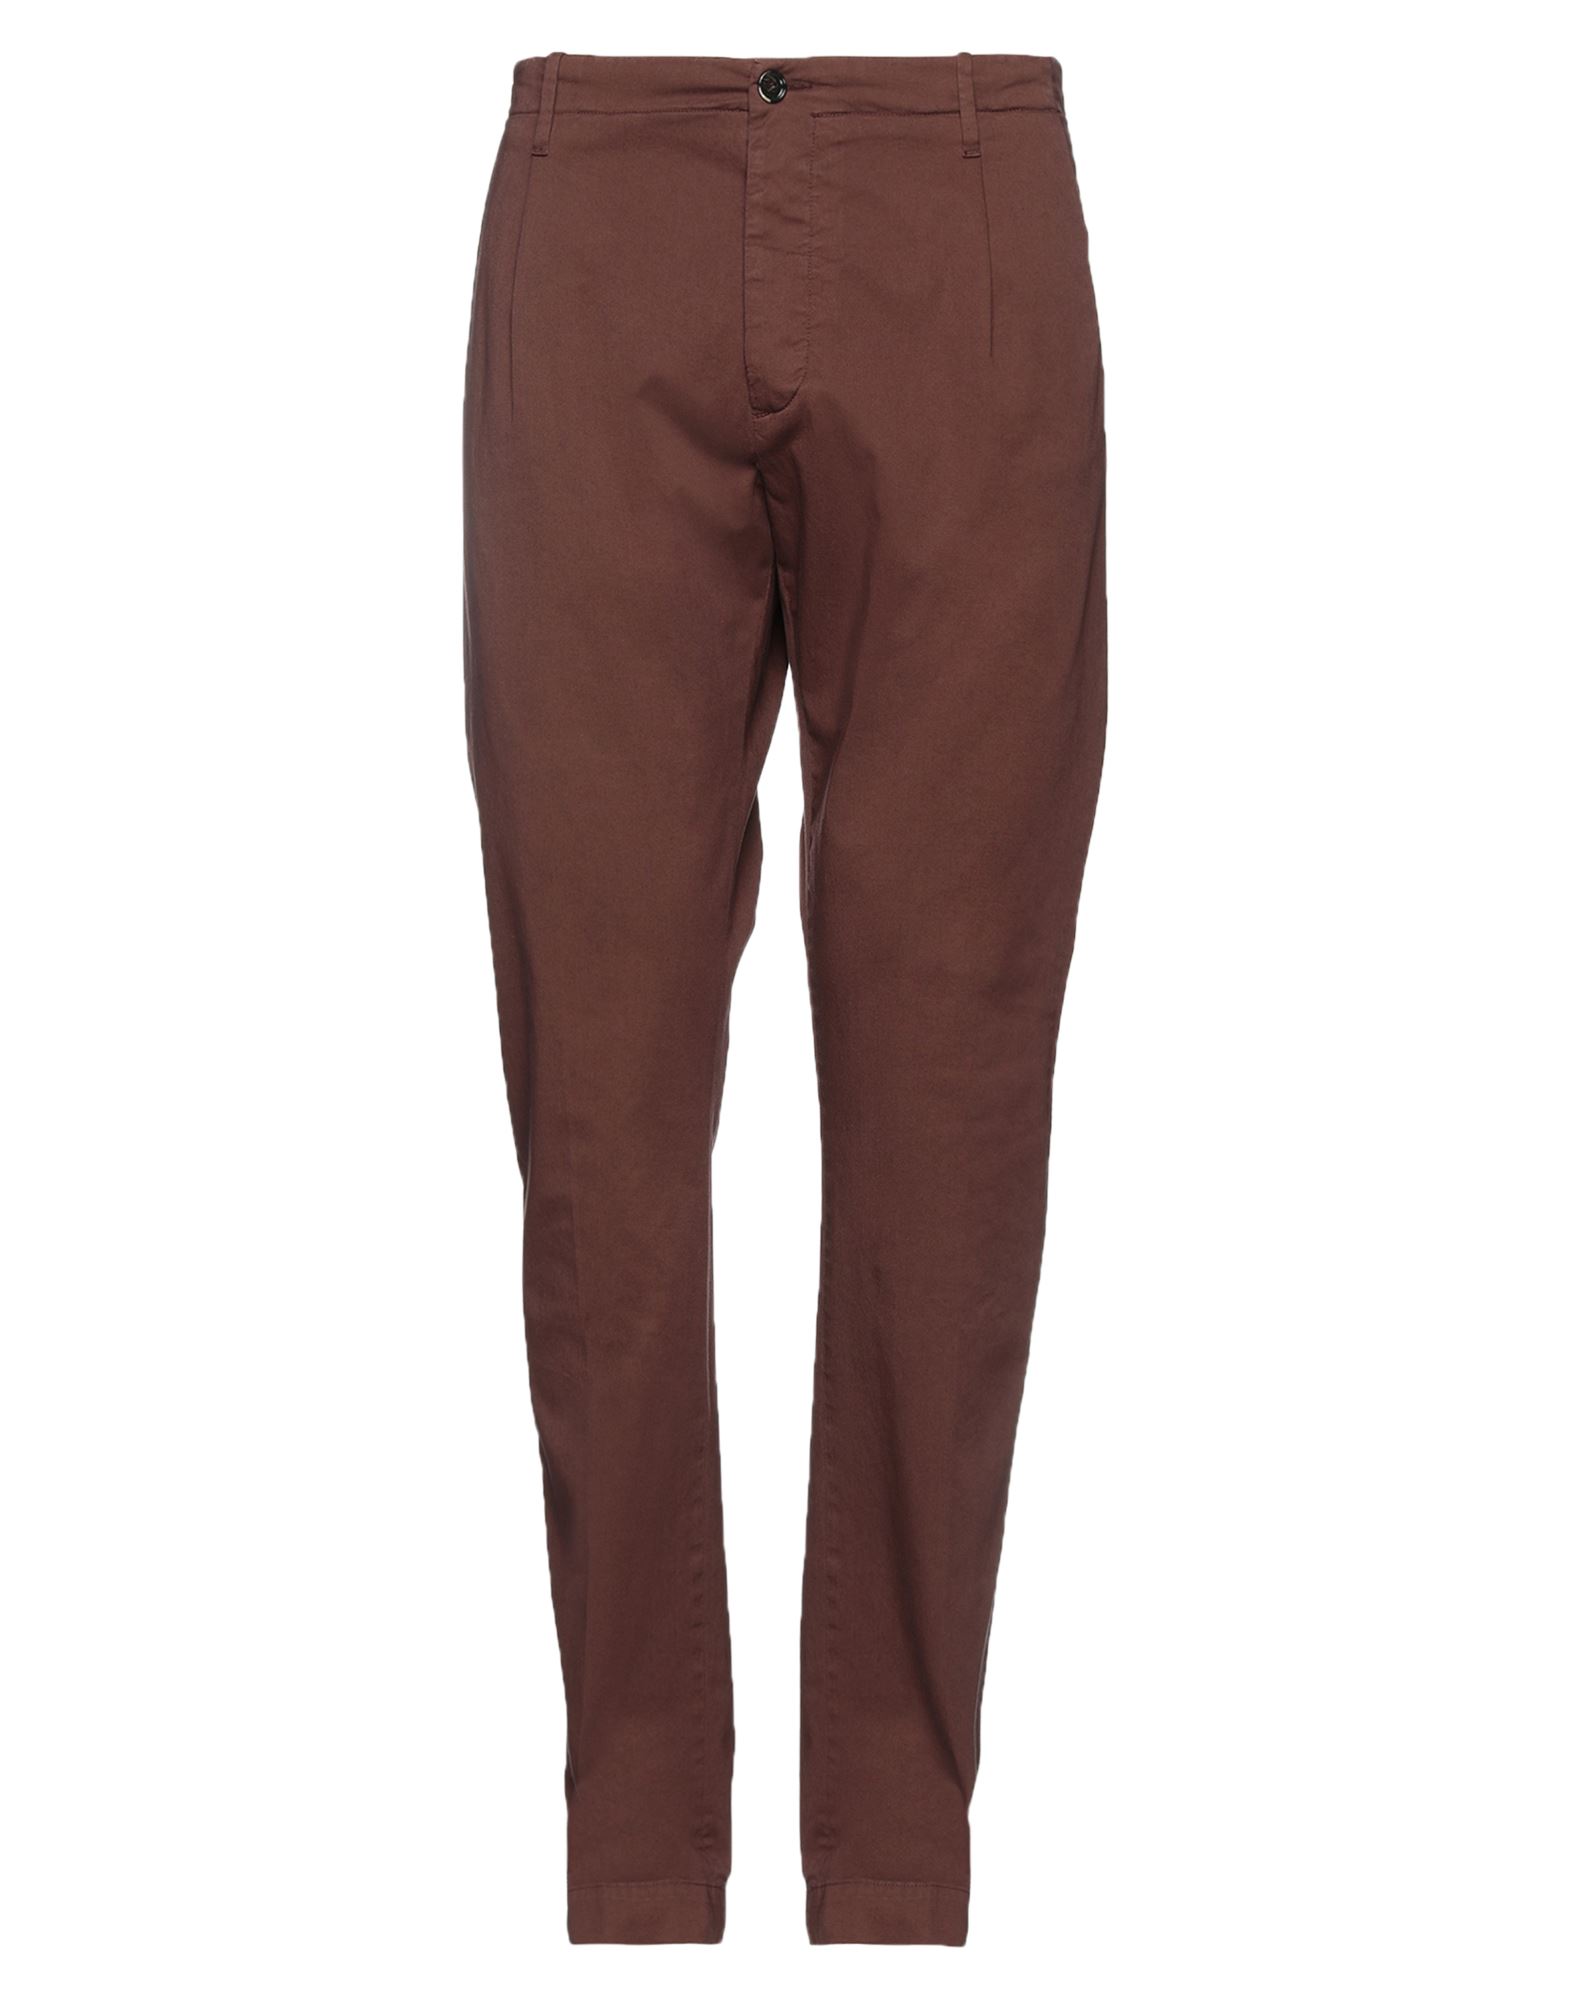 NINE:INTHE:MORNING NINE IN THE MORNING MAN PANTS COCOA SIZE 34 COTTON, LINEN, ELASTANE